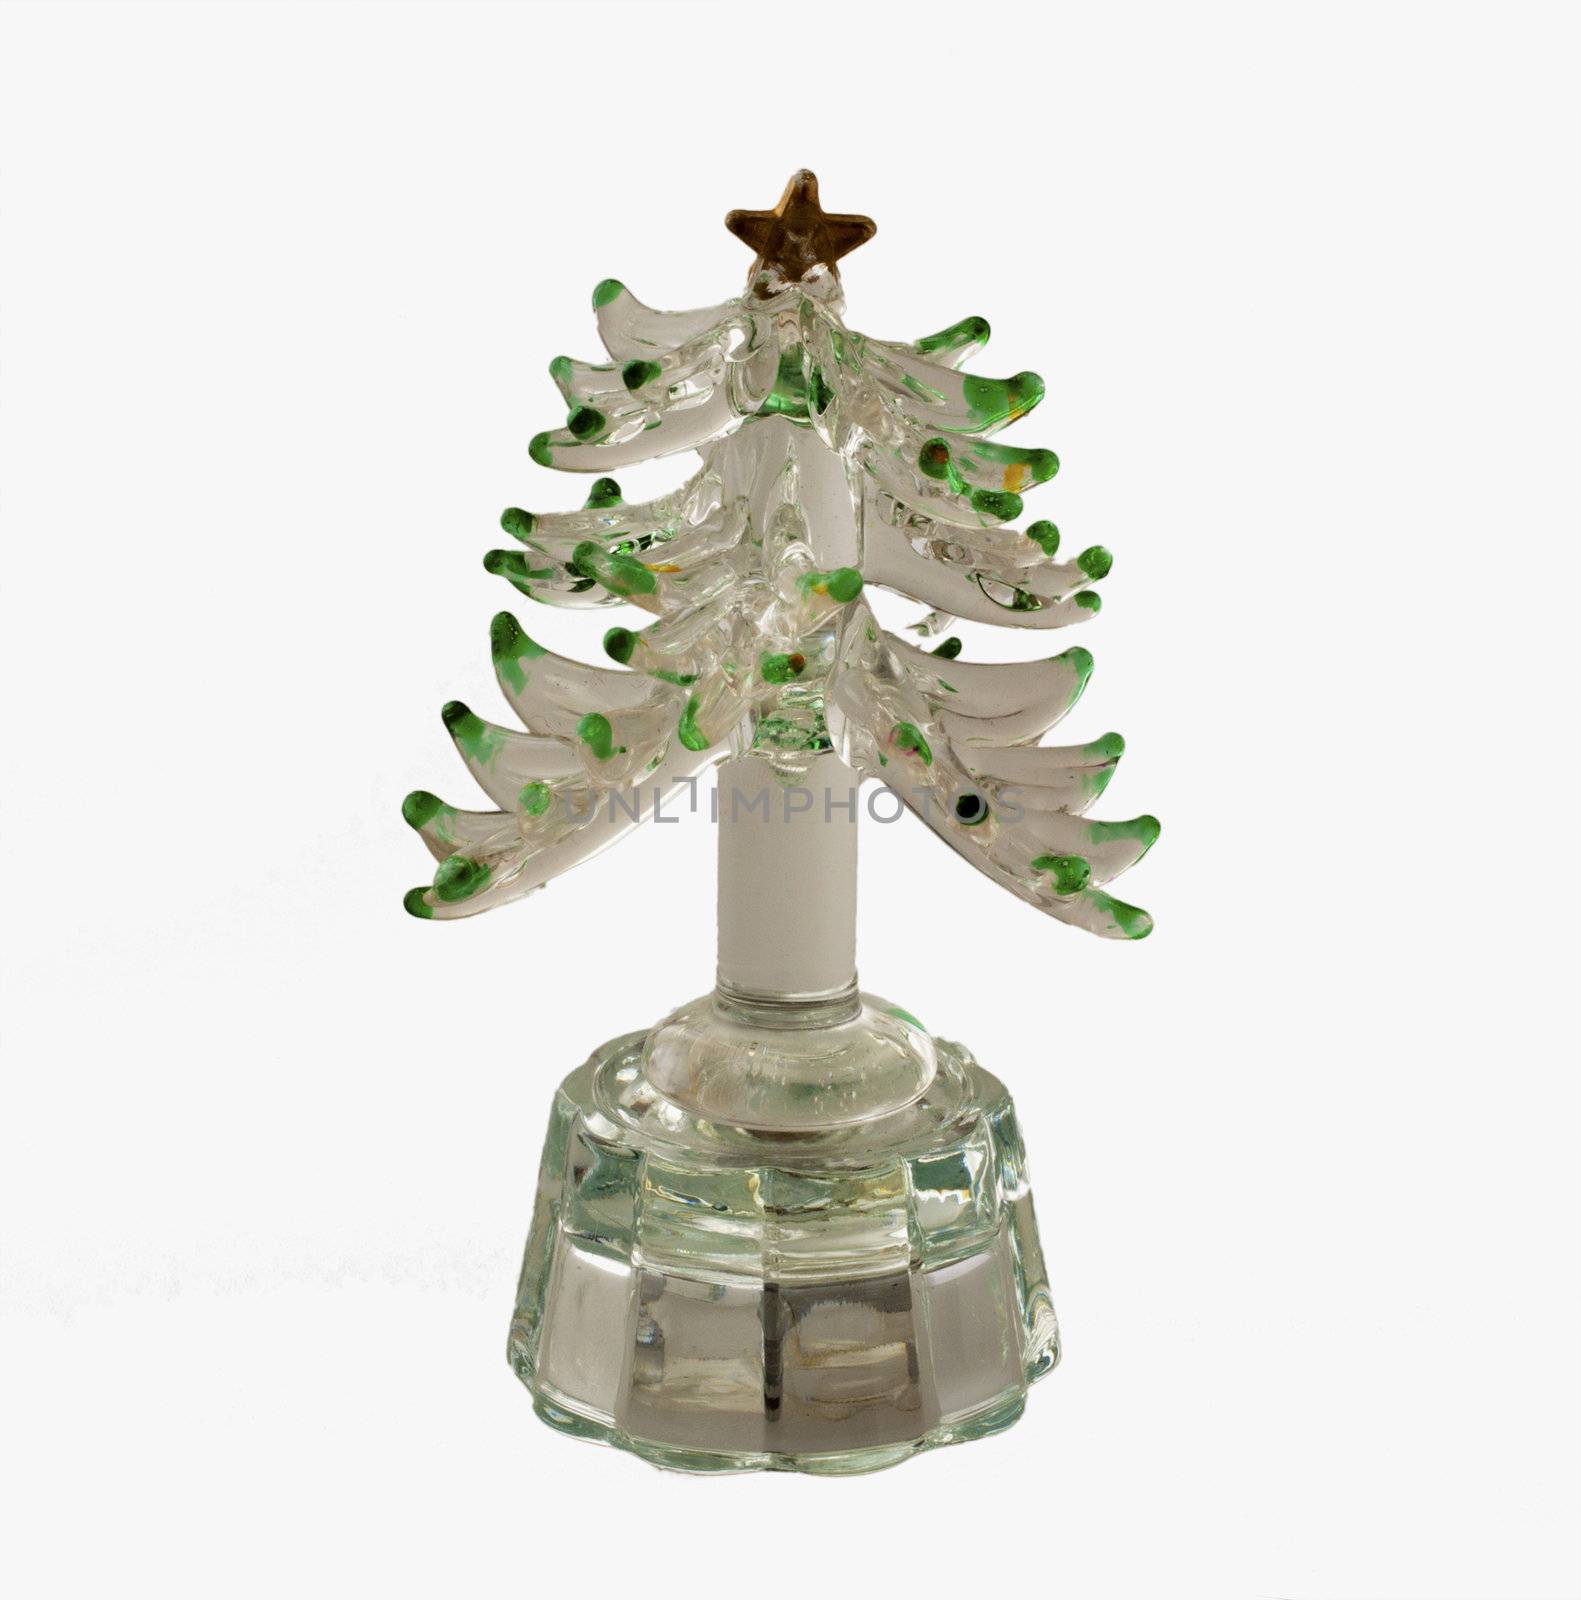 Little plastic Christmas tree for decoration over white background